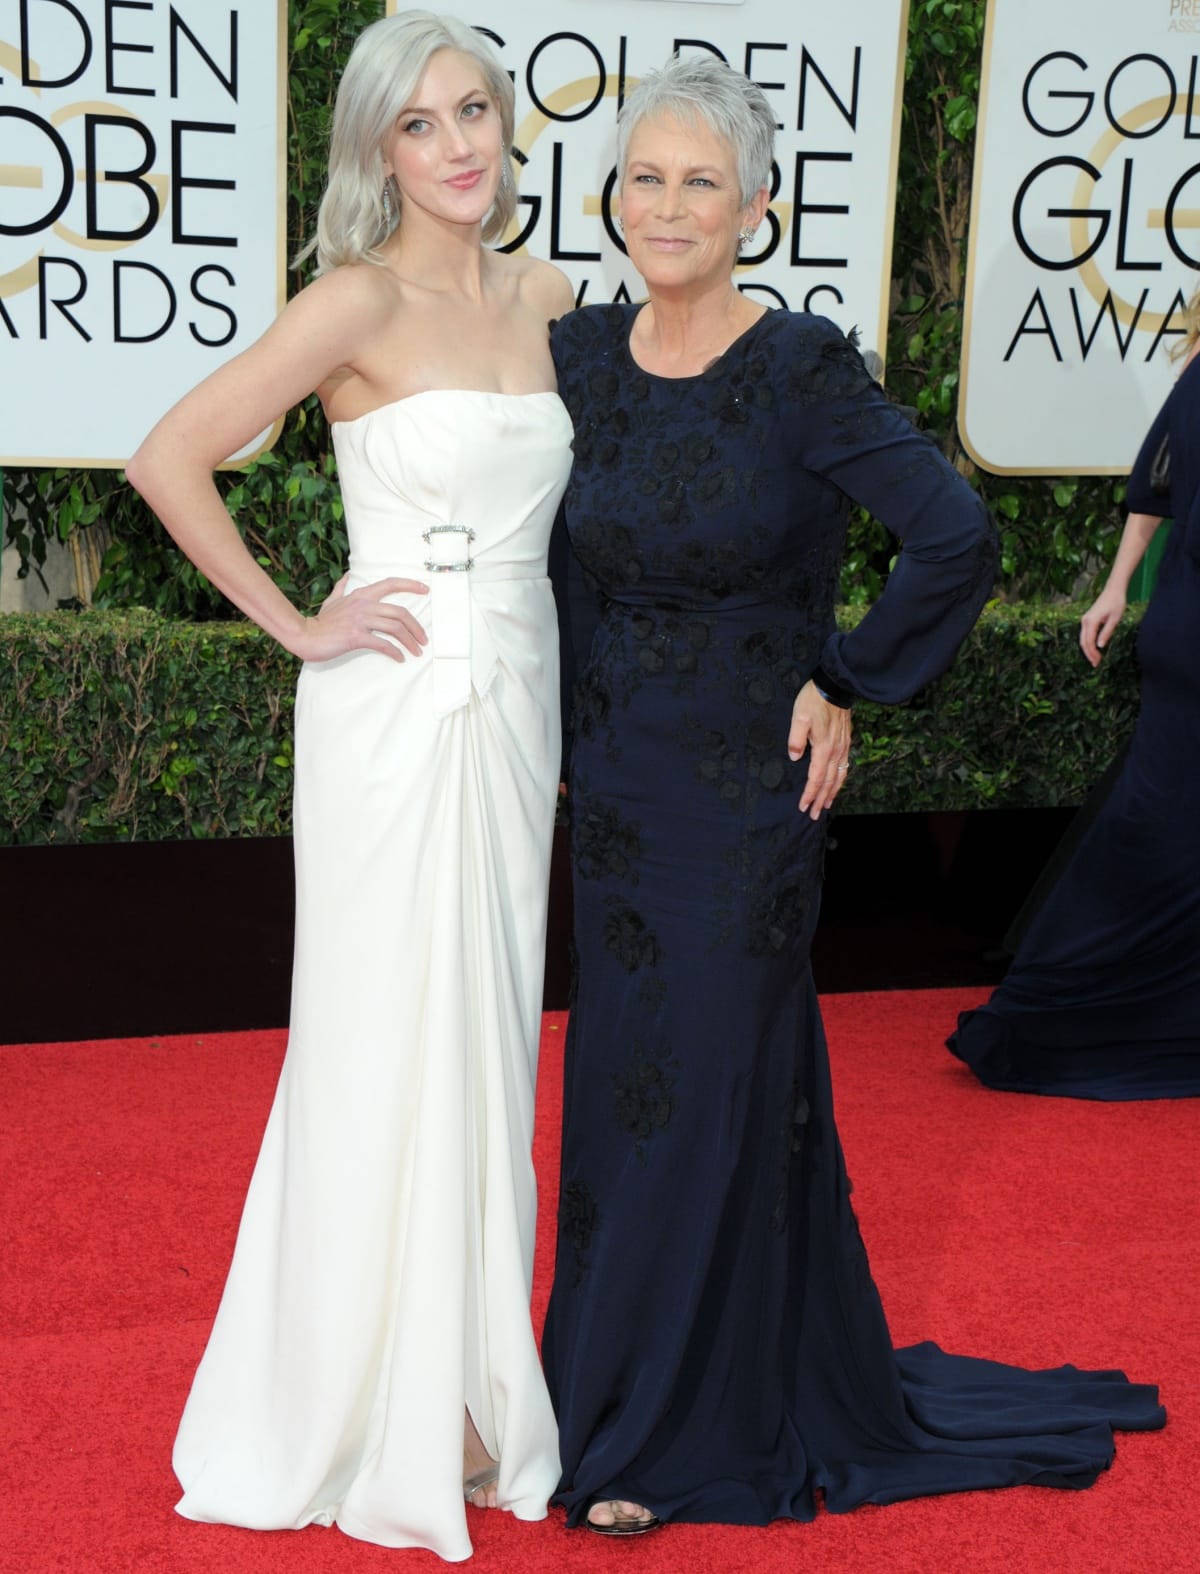 Among the many ways Annie Guest shows her support is joining mother Jamie Lee Curtis on red carpet events